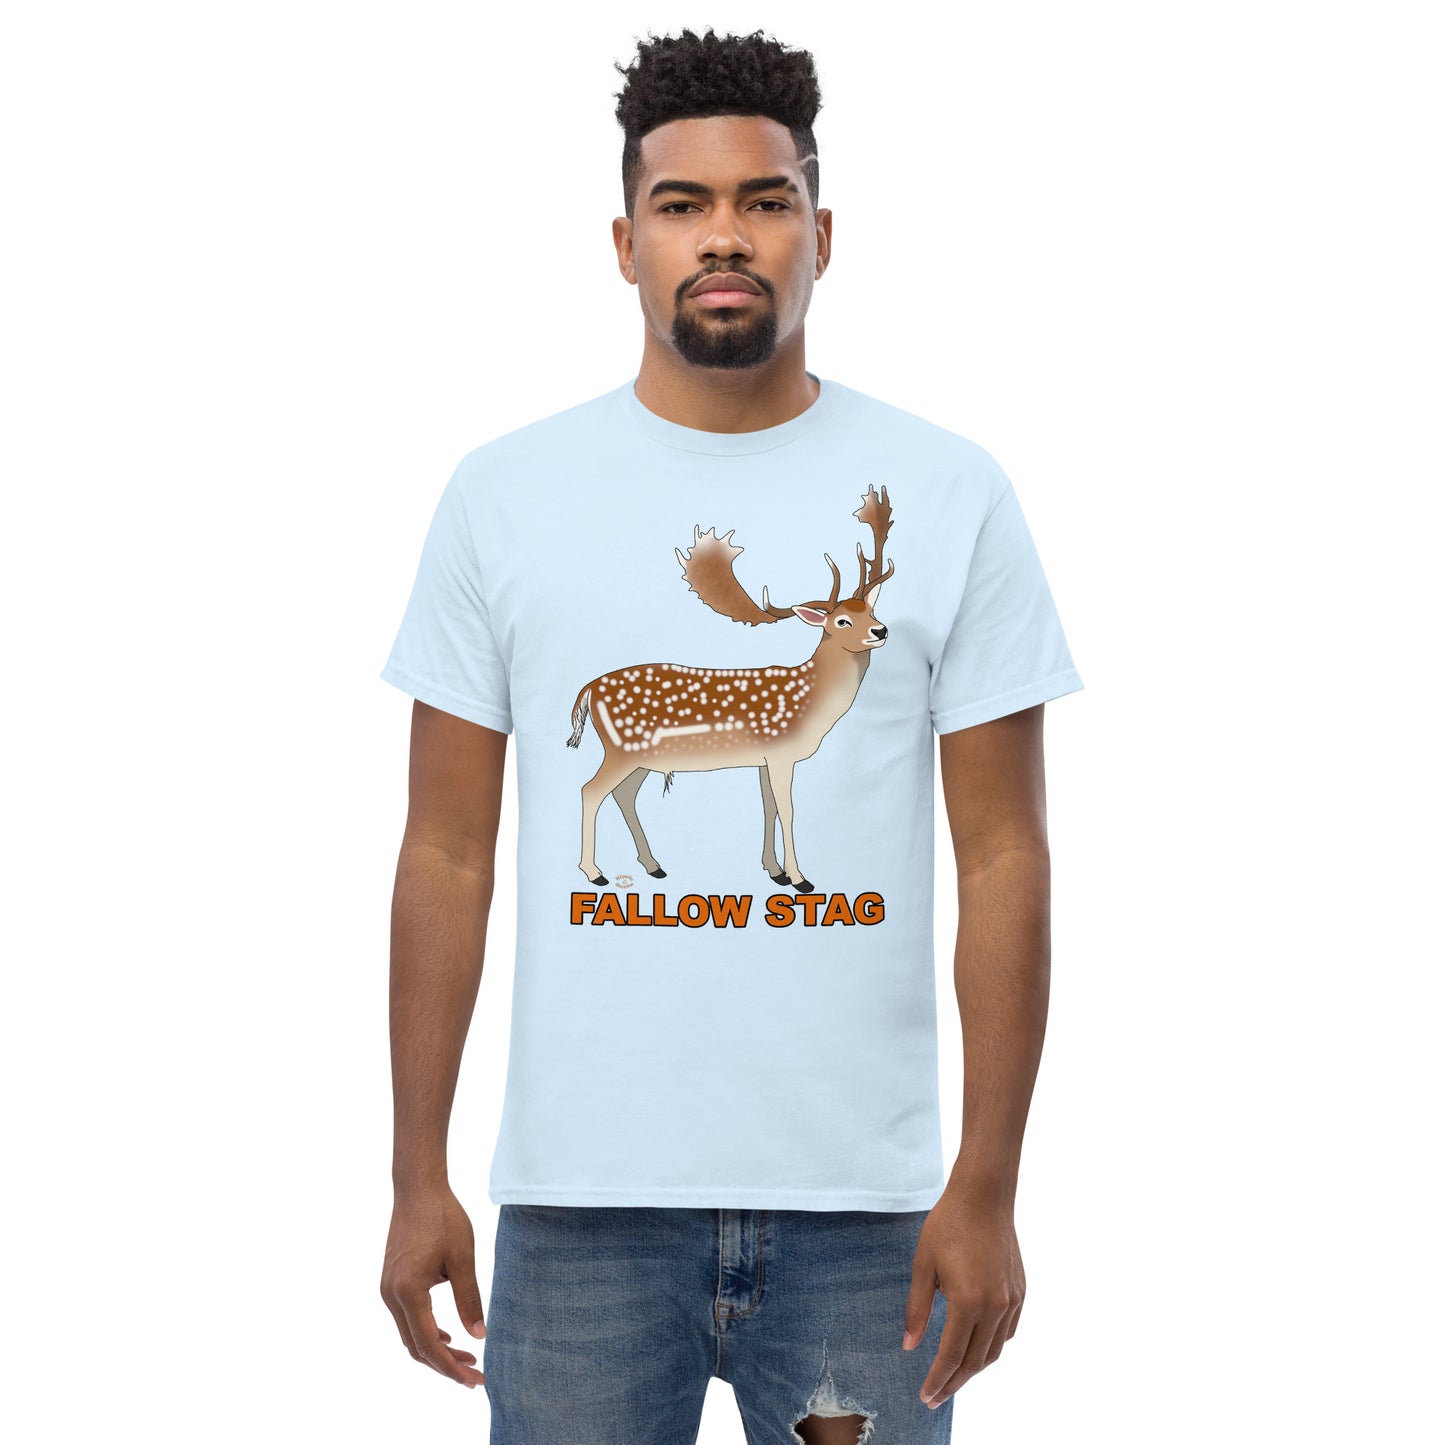 "Fallow Stag" Men's Classic Tee